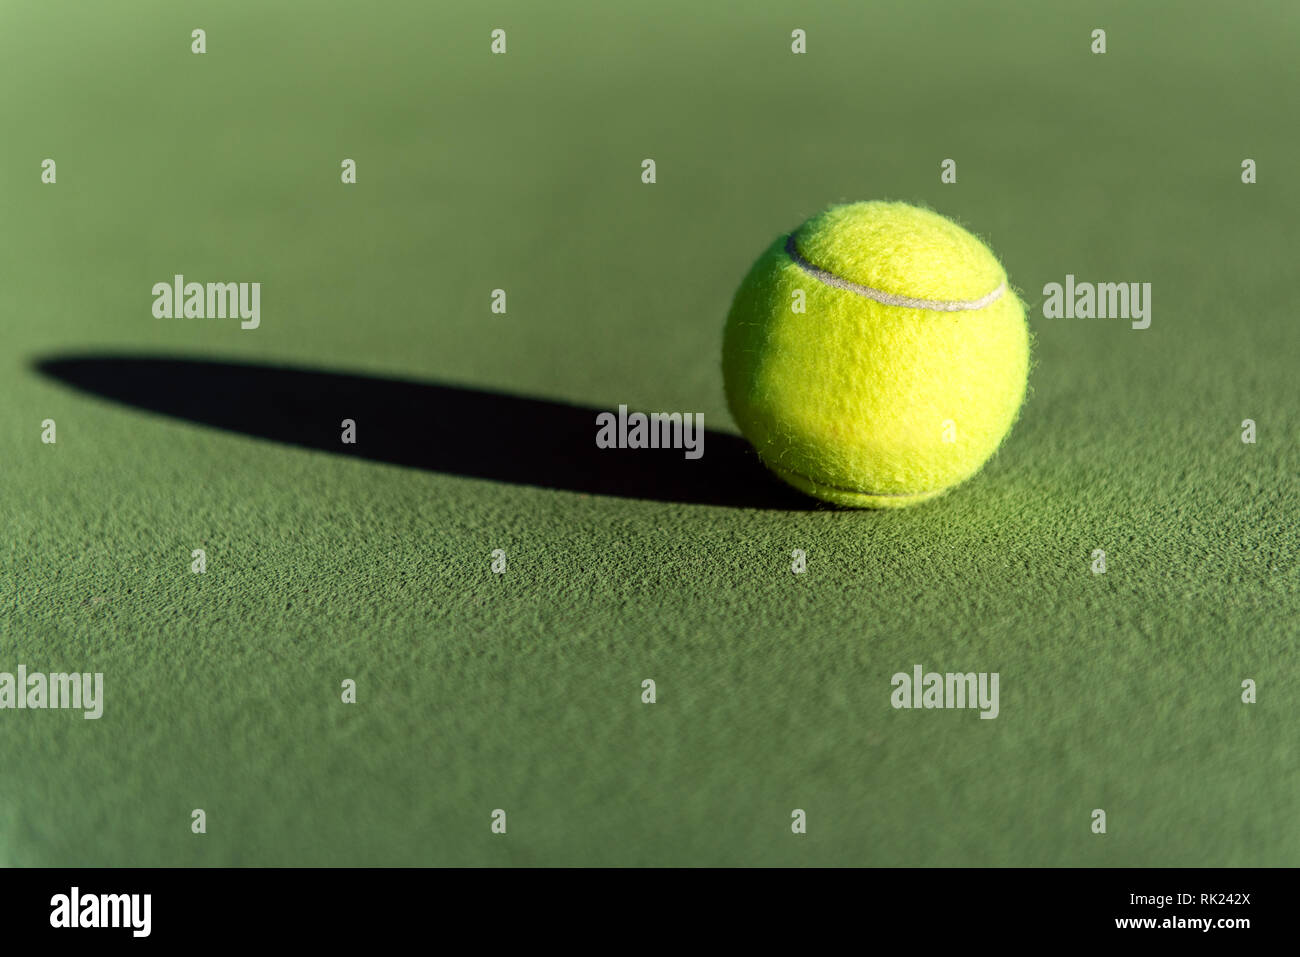 Fuzzy yellow tennis ball lying on the textured surface of court over a long shadow. Stock Photo